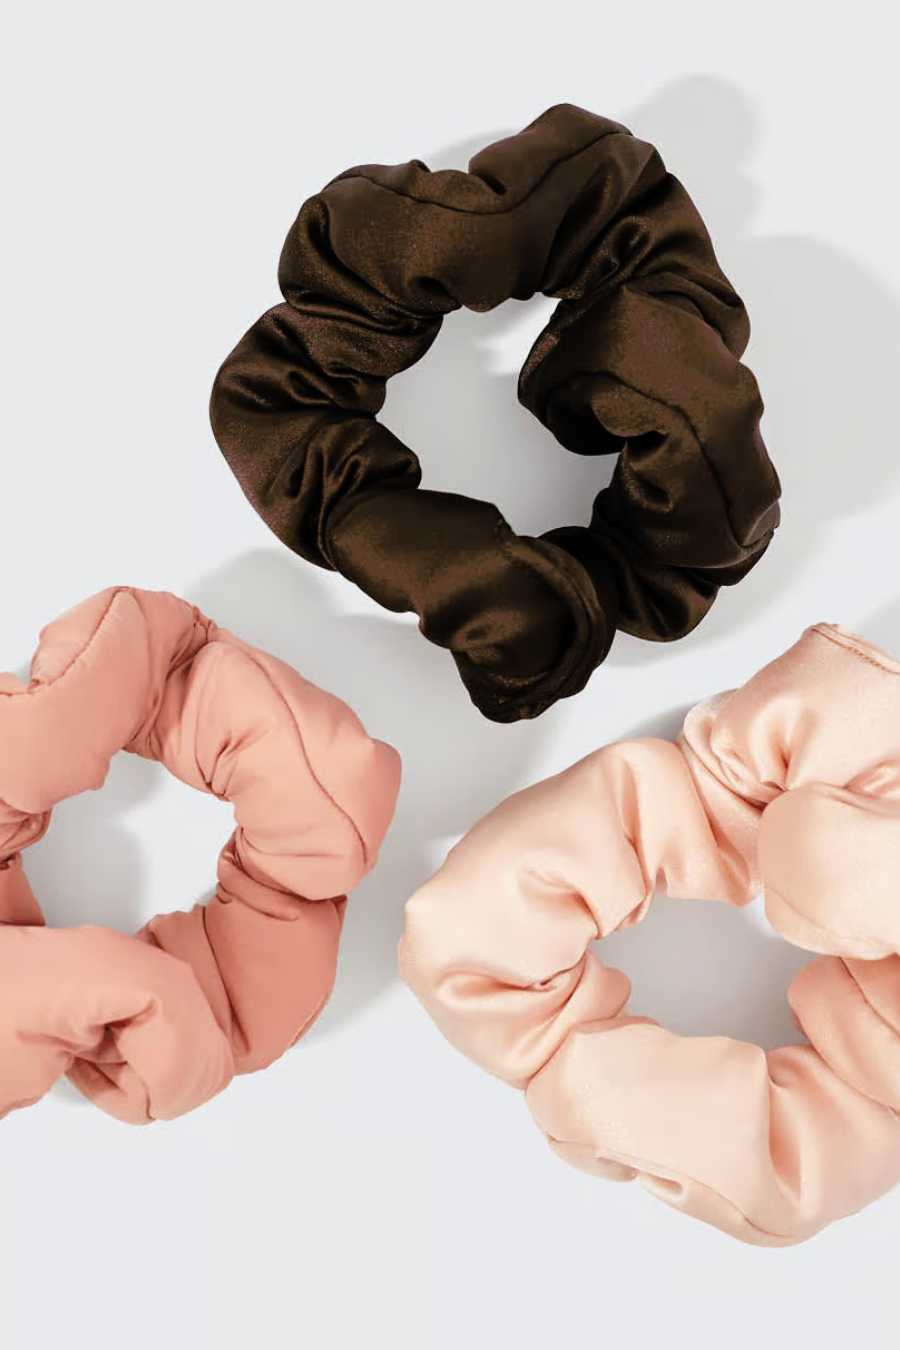 3 scrunchies laying on white background